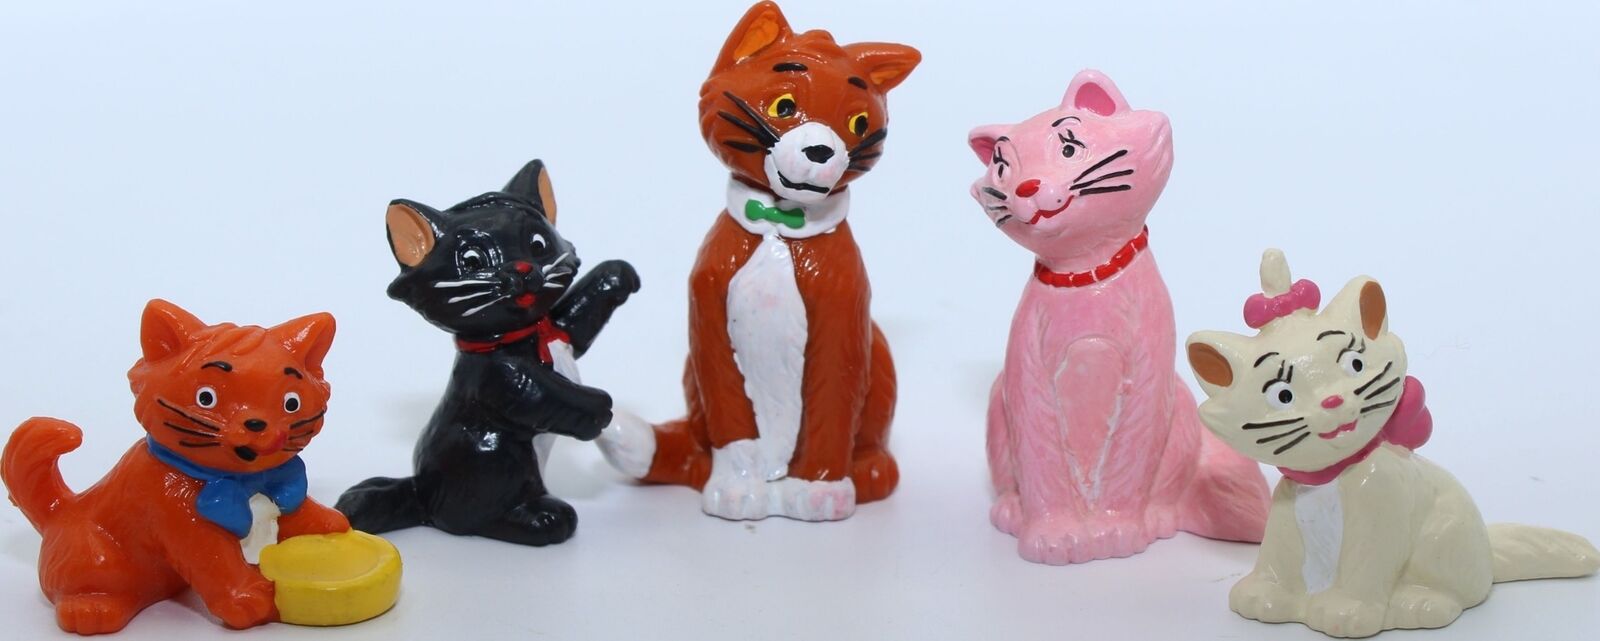 VTG 1982 Disney Bully The Aristocats Marie Toulouse Berlioz Action Figure Lot 5